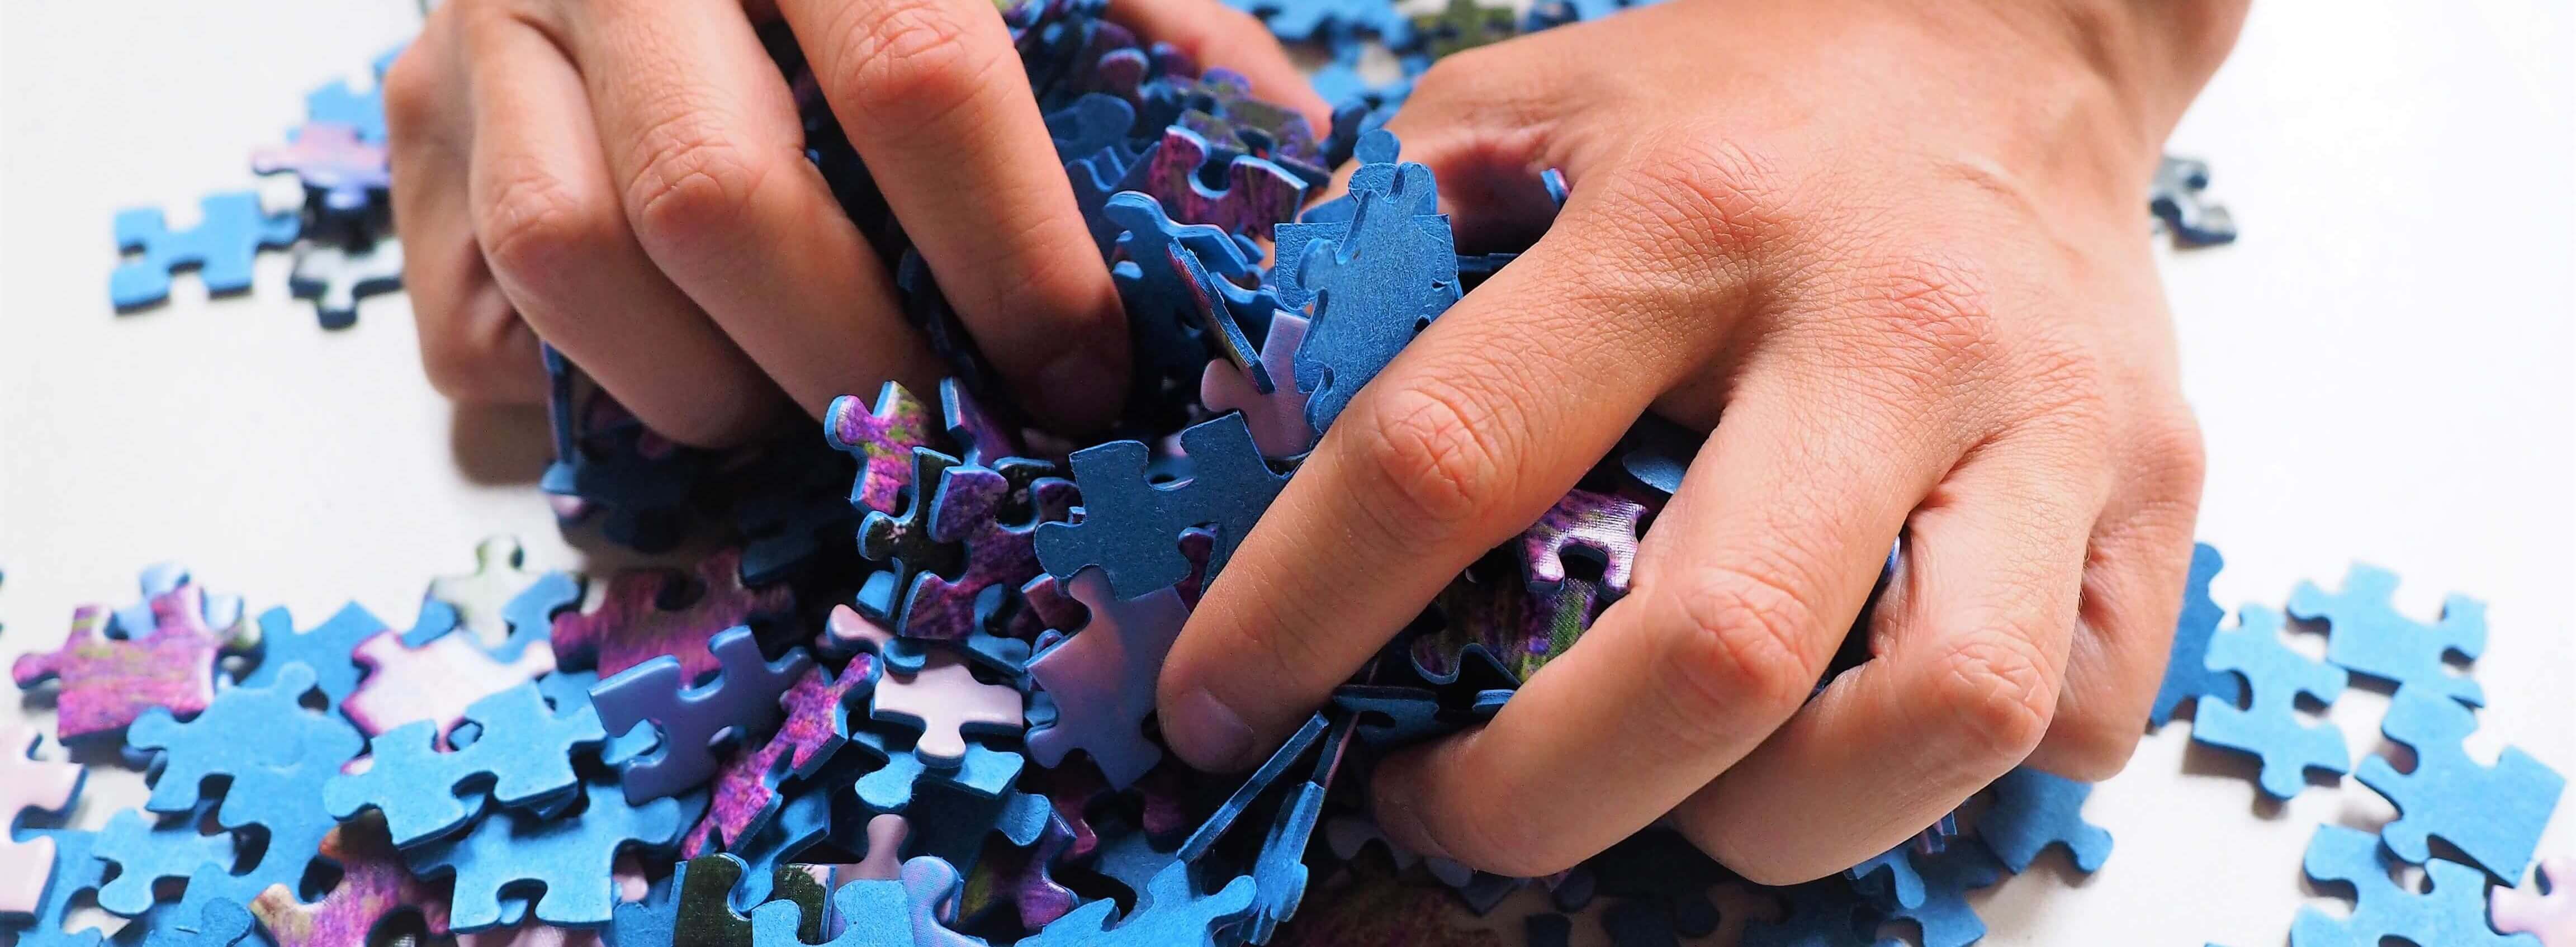 Hands grabbing and sorting through a mix of puzzle pieces